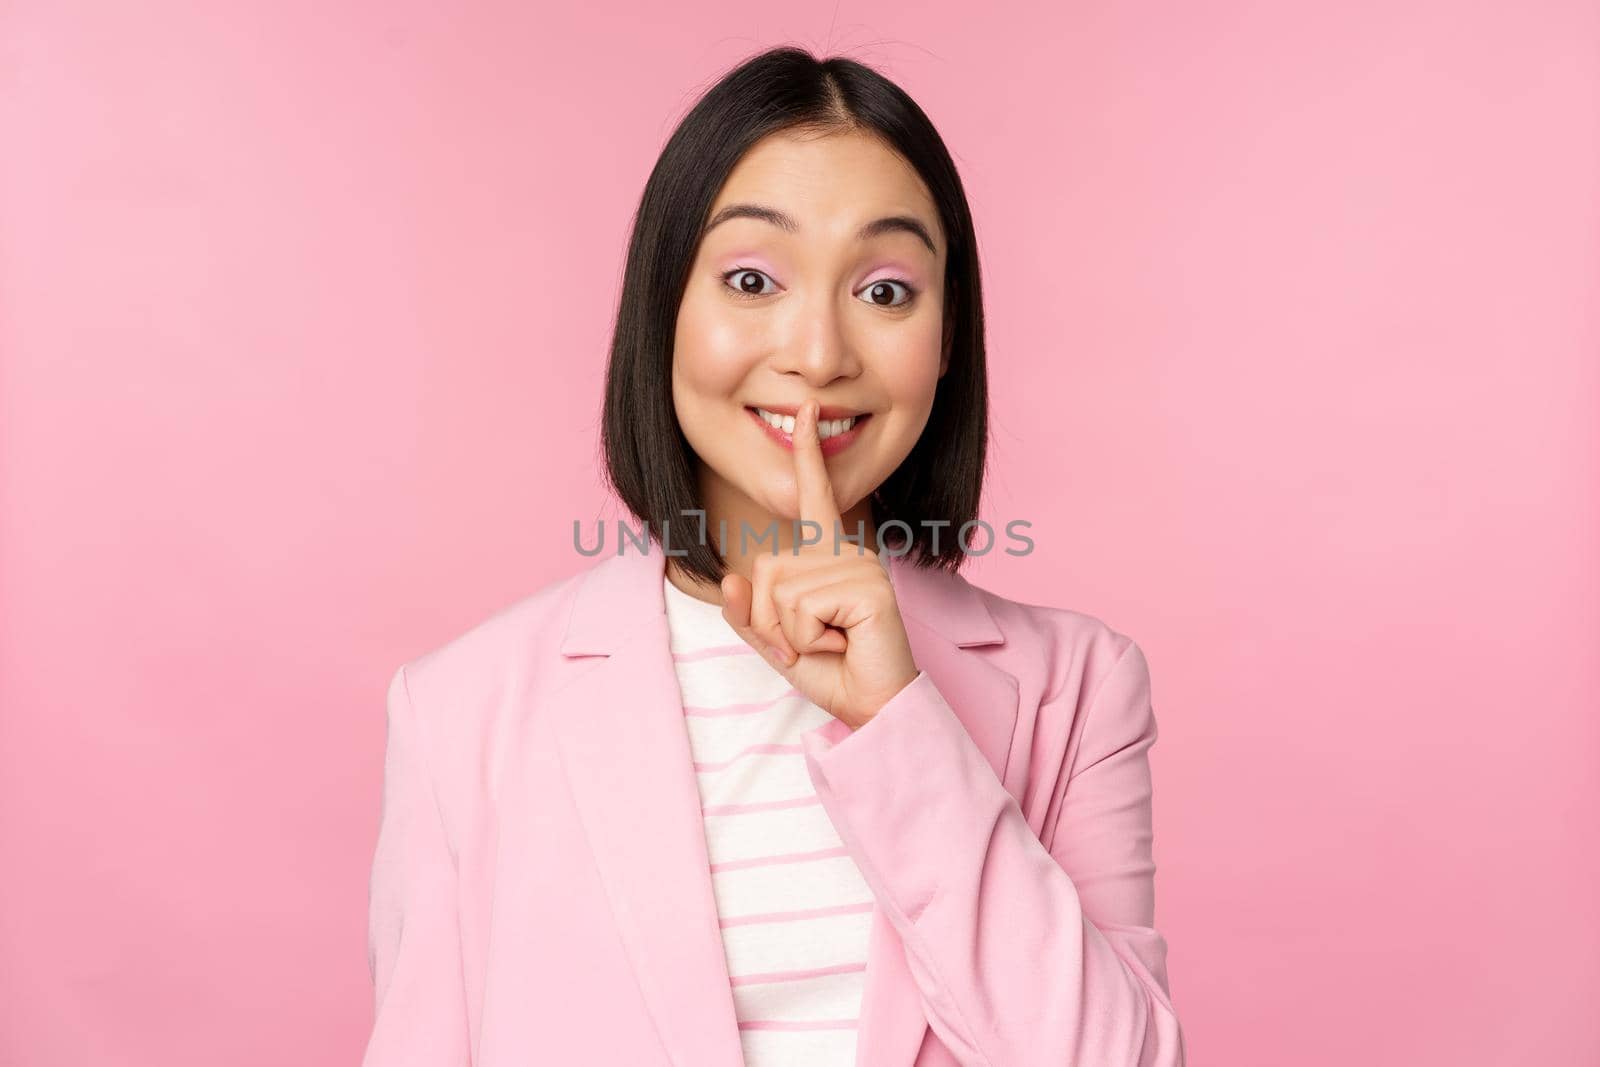 Hush, taboo concept. Portrait of asian businesswoman showing shush gesture, shhh sign, press finger to lips, standing over pink background in suit.